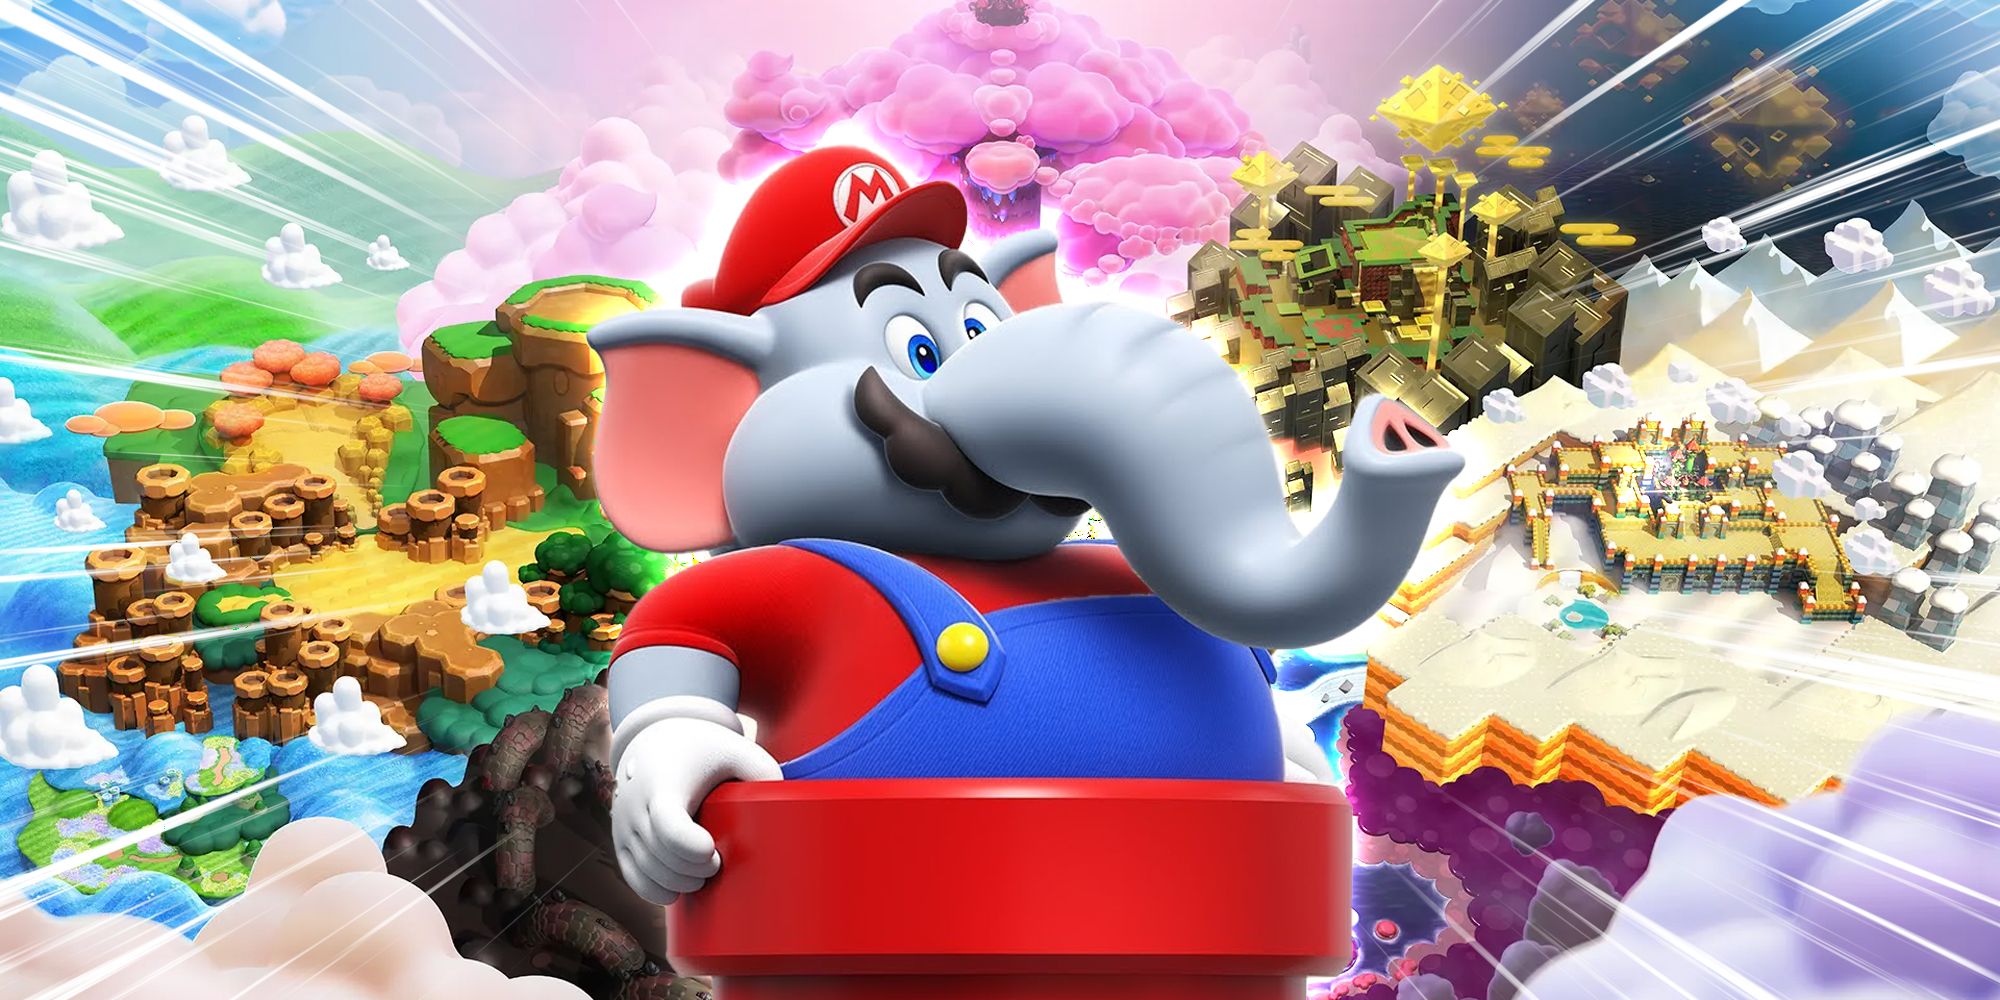 Every Super Mario Game Ranked From Worst To Best